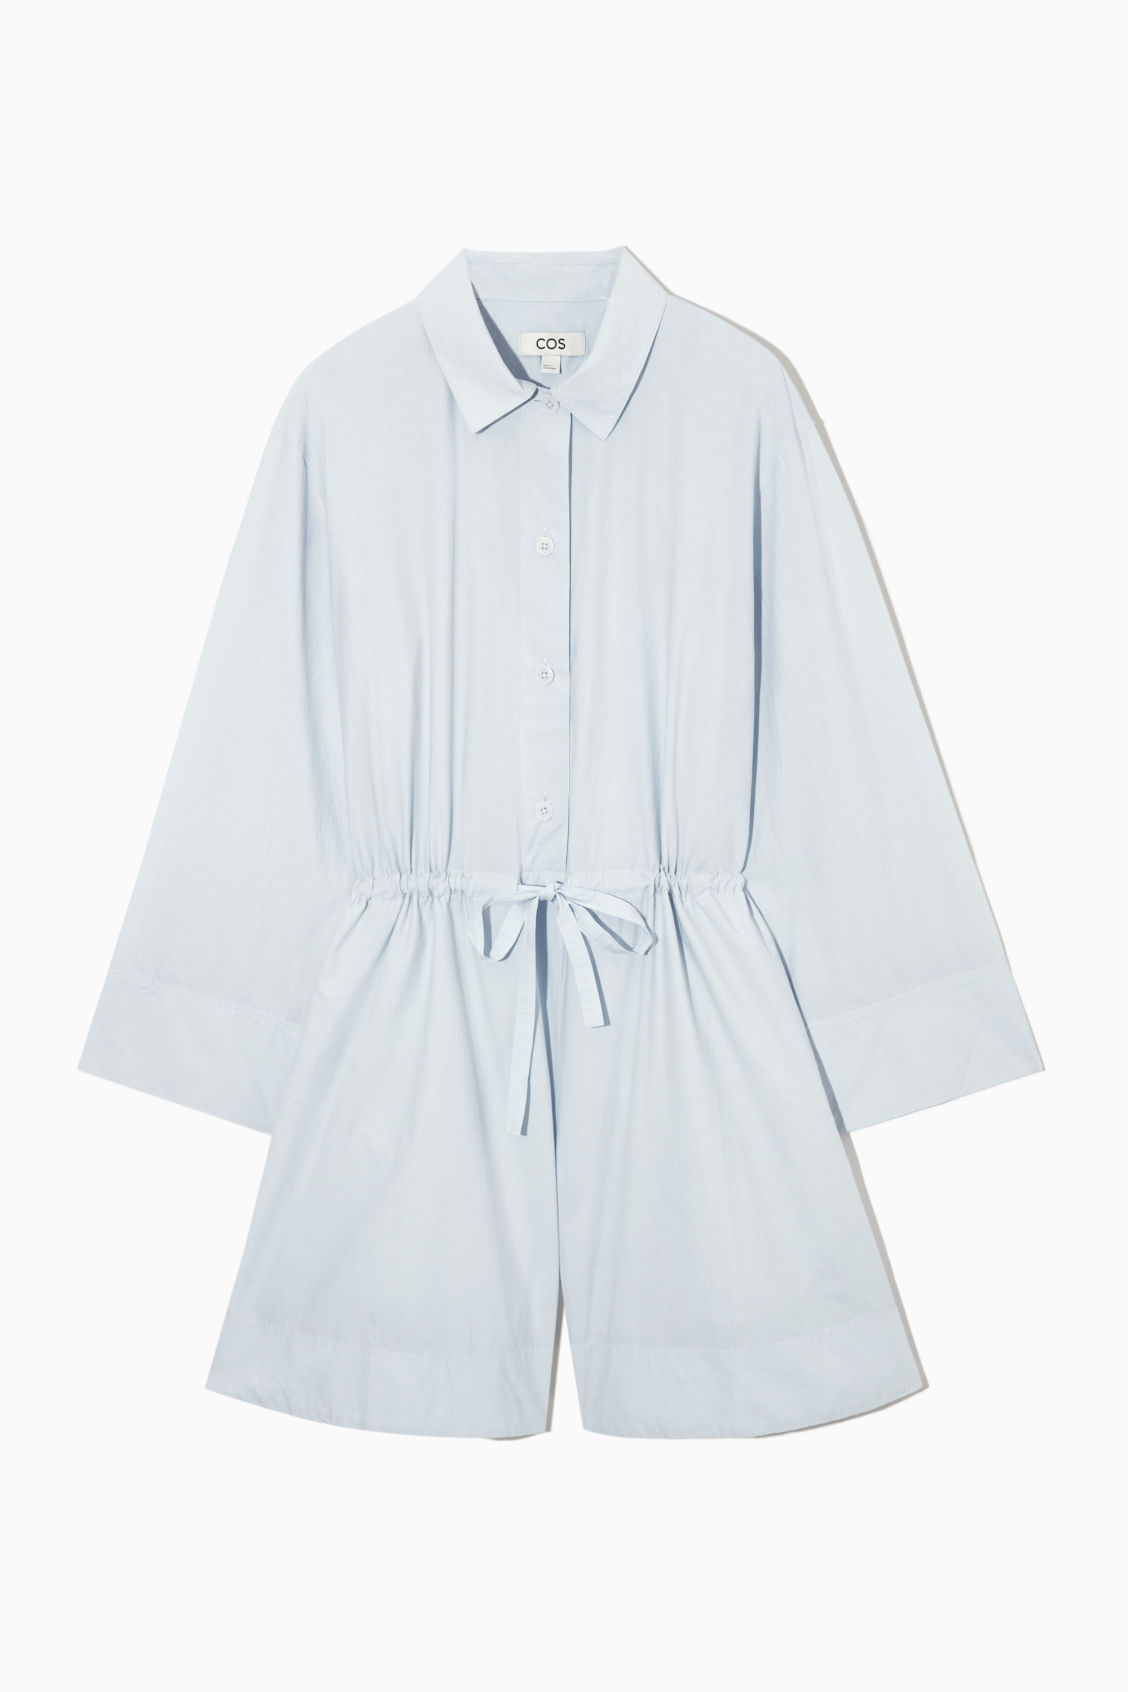 zoomed image favourites.icon.add.accessibility LONG-SLEEVED POPLIN PLAYSUIT £79